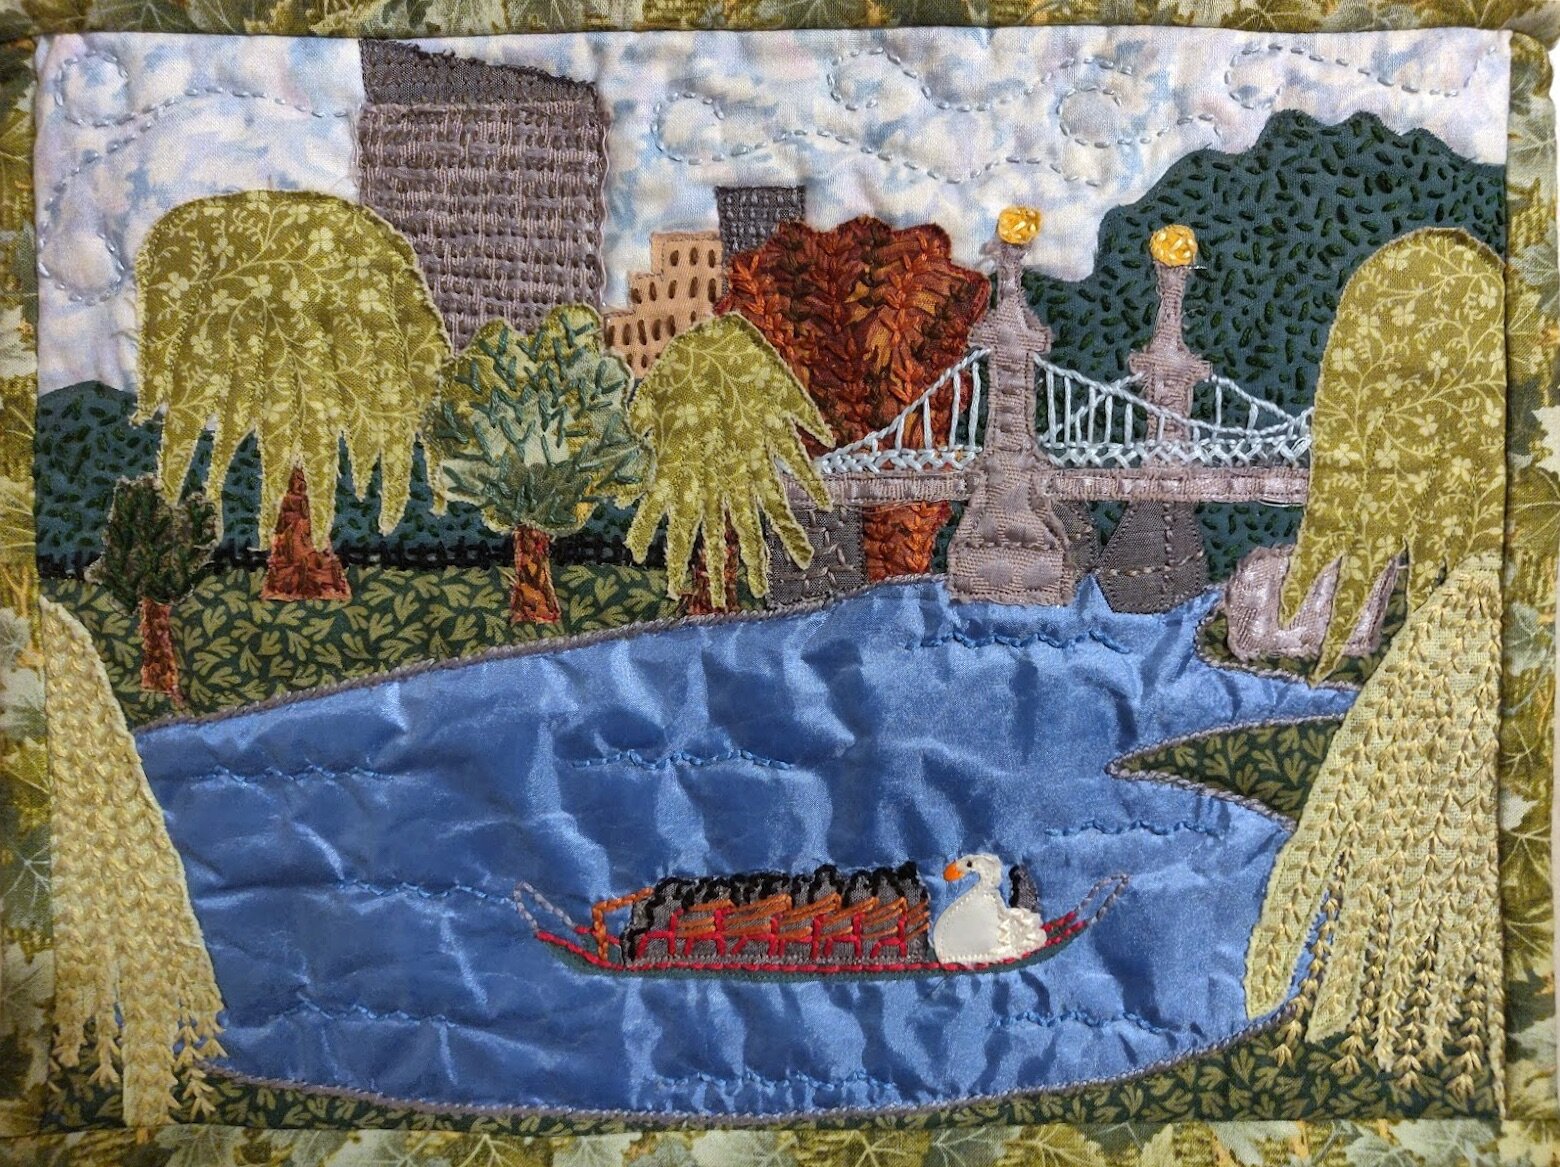  Boston Public Garden  Appliqué quilt with hand embroidery, machine sewing 